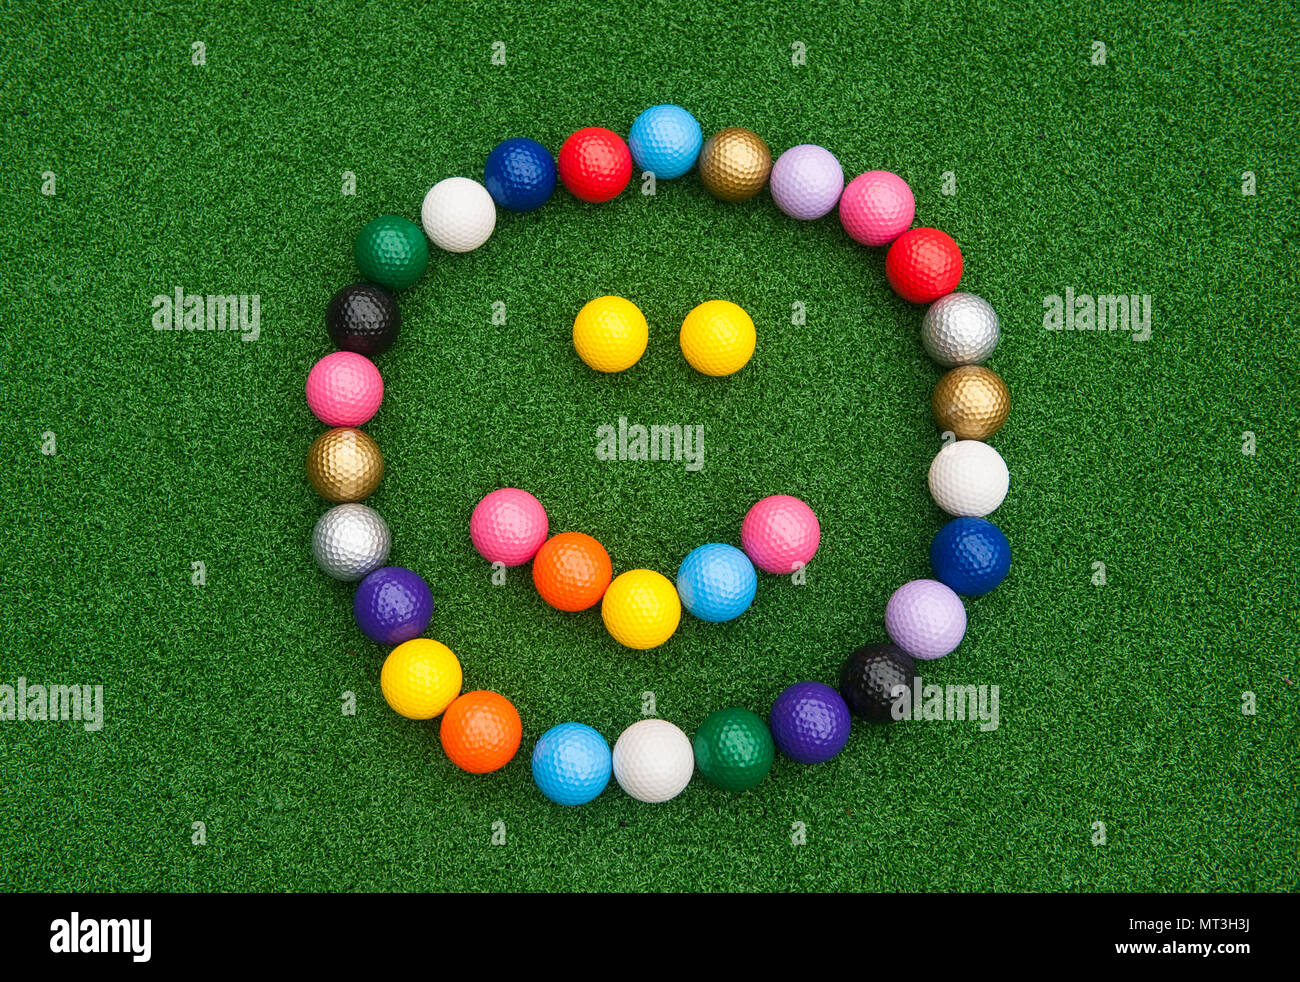 Happy face formed with colorful mini golf balls on artificial grass Stock Photo